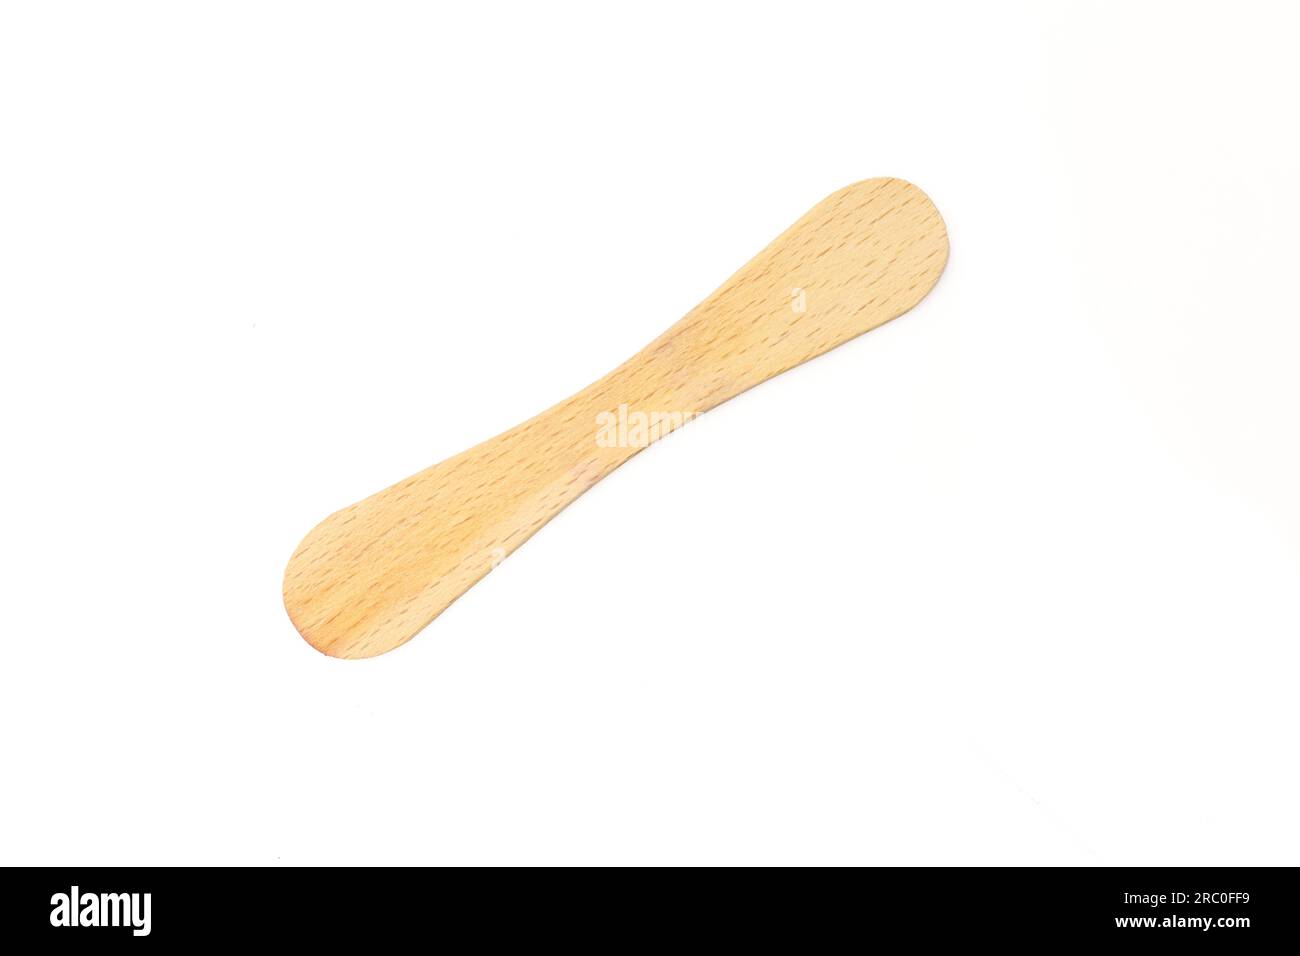 Wooden ice cream lolly stick isolated on white background Stock Photo